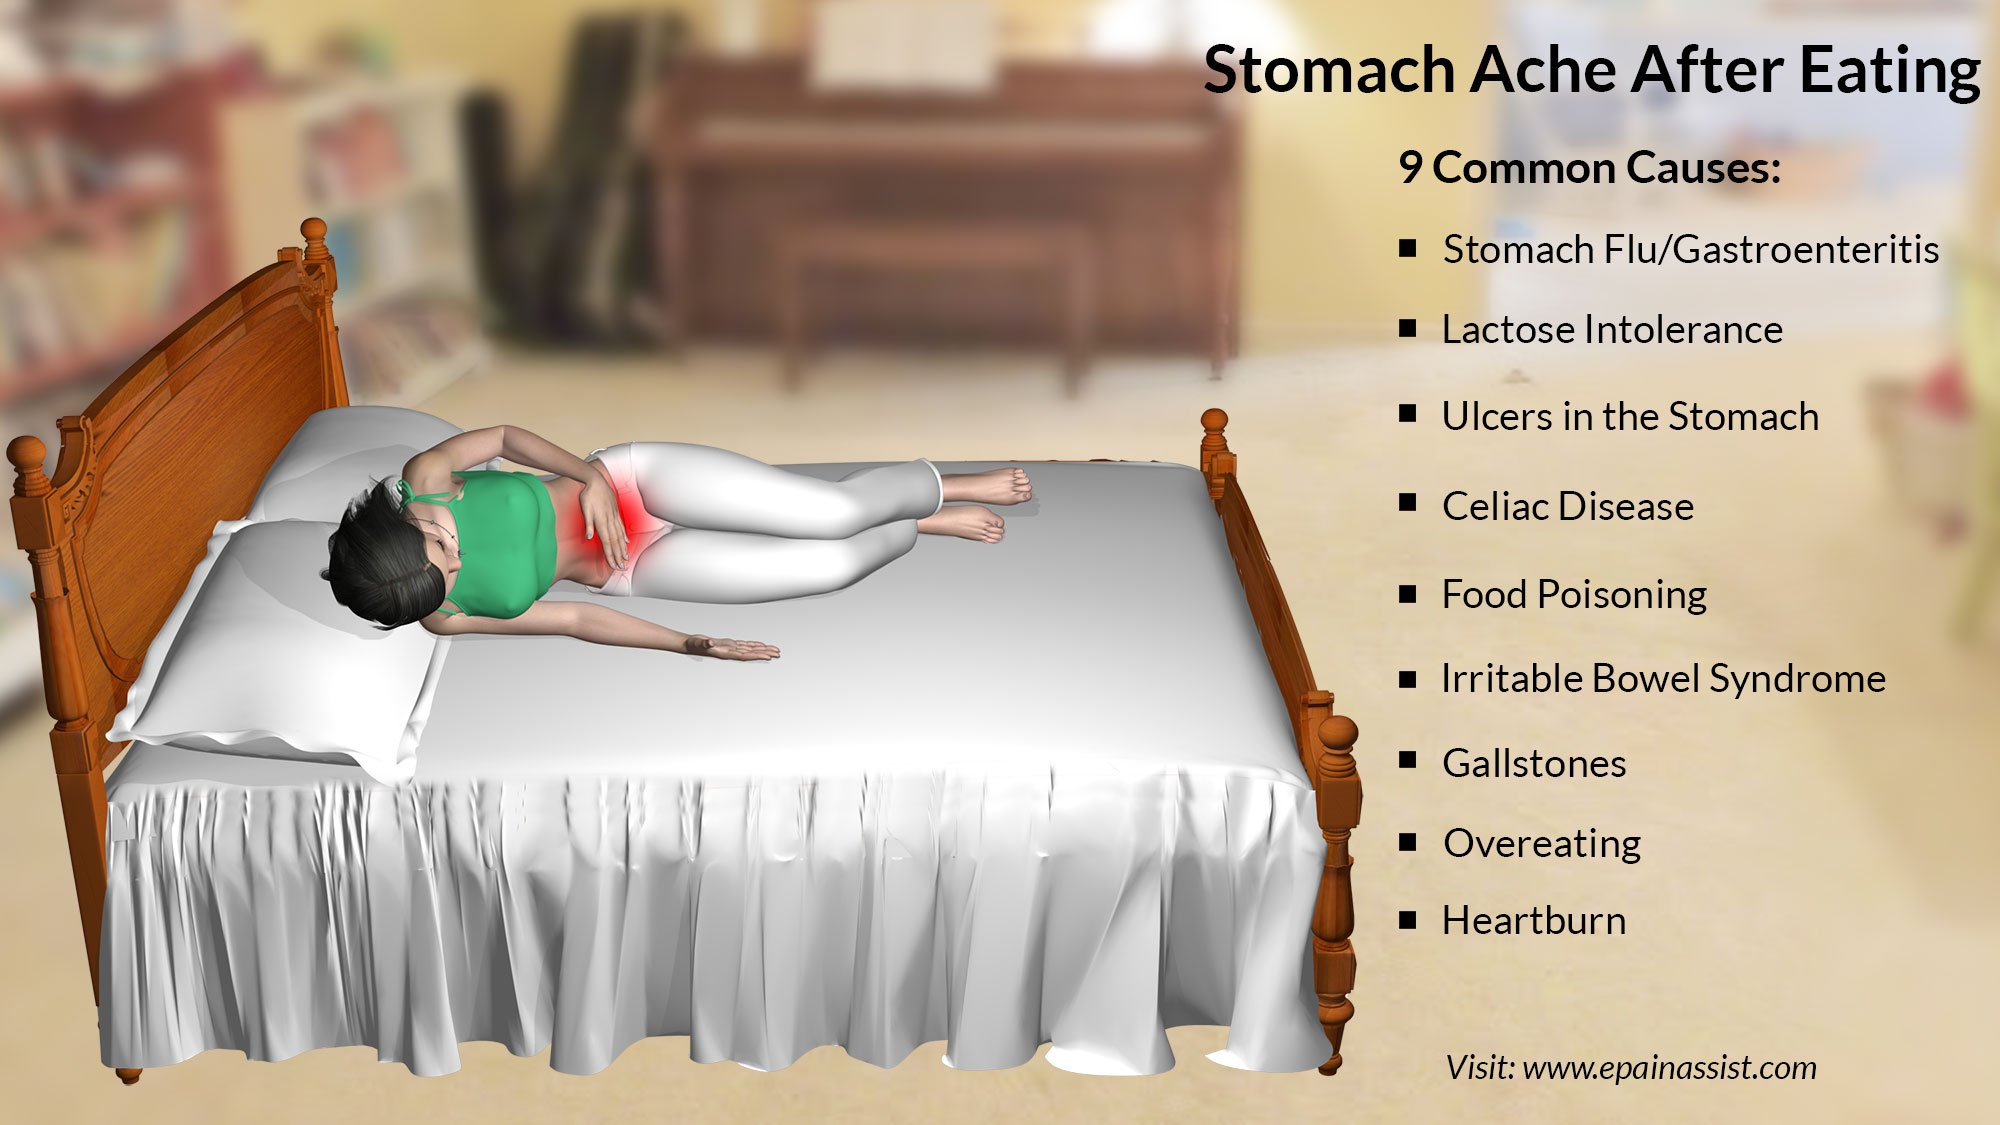 How To Help Stomach Pain